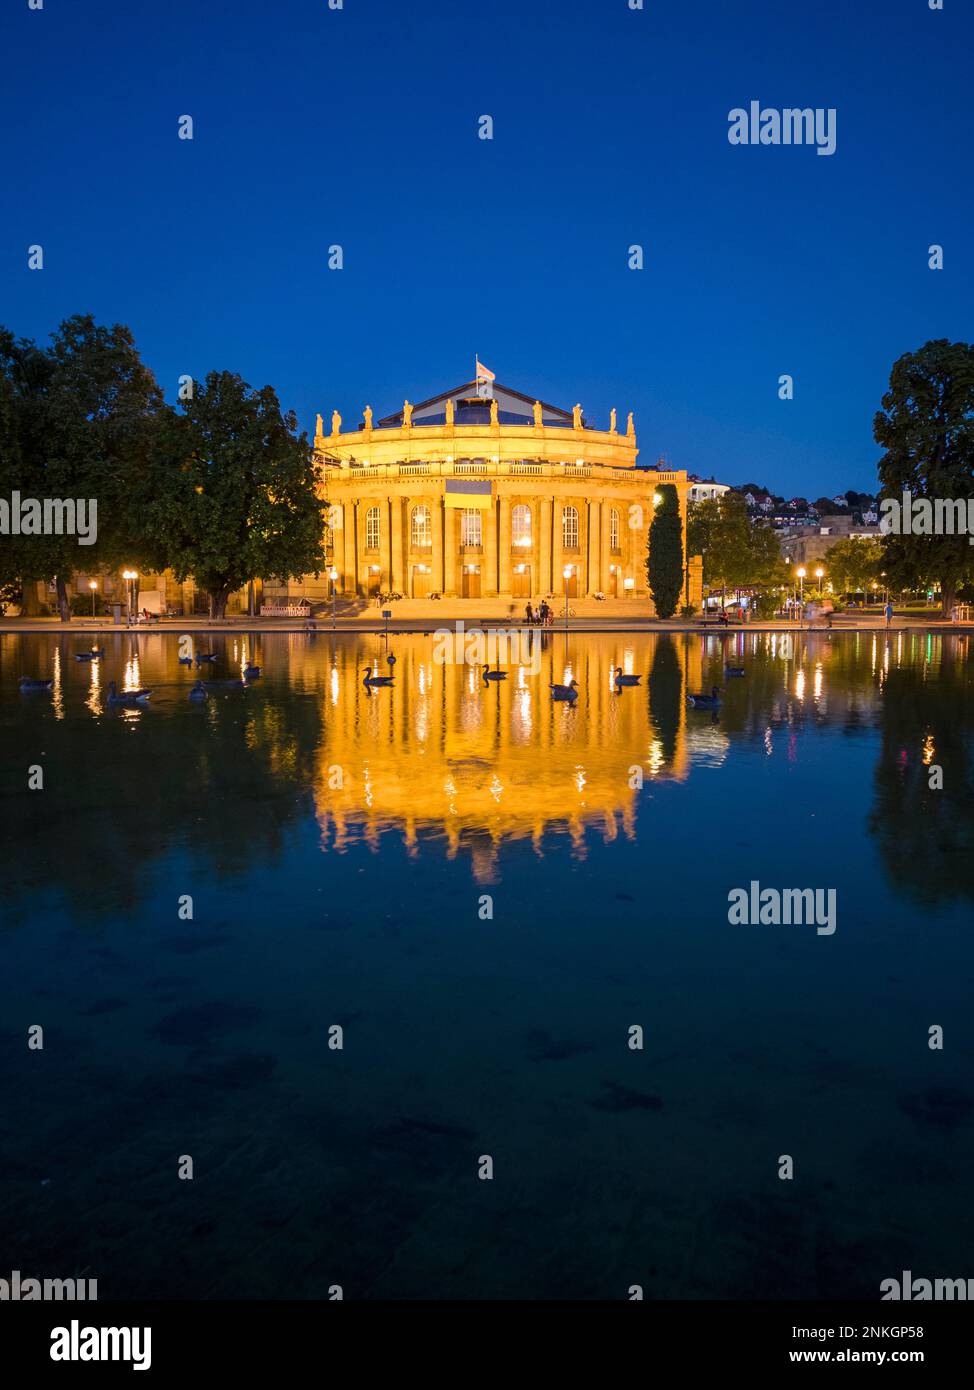 Reflection of Stuttgart State Theatre reflecting in water at night, Stuttgart, Germany Stock Photo